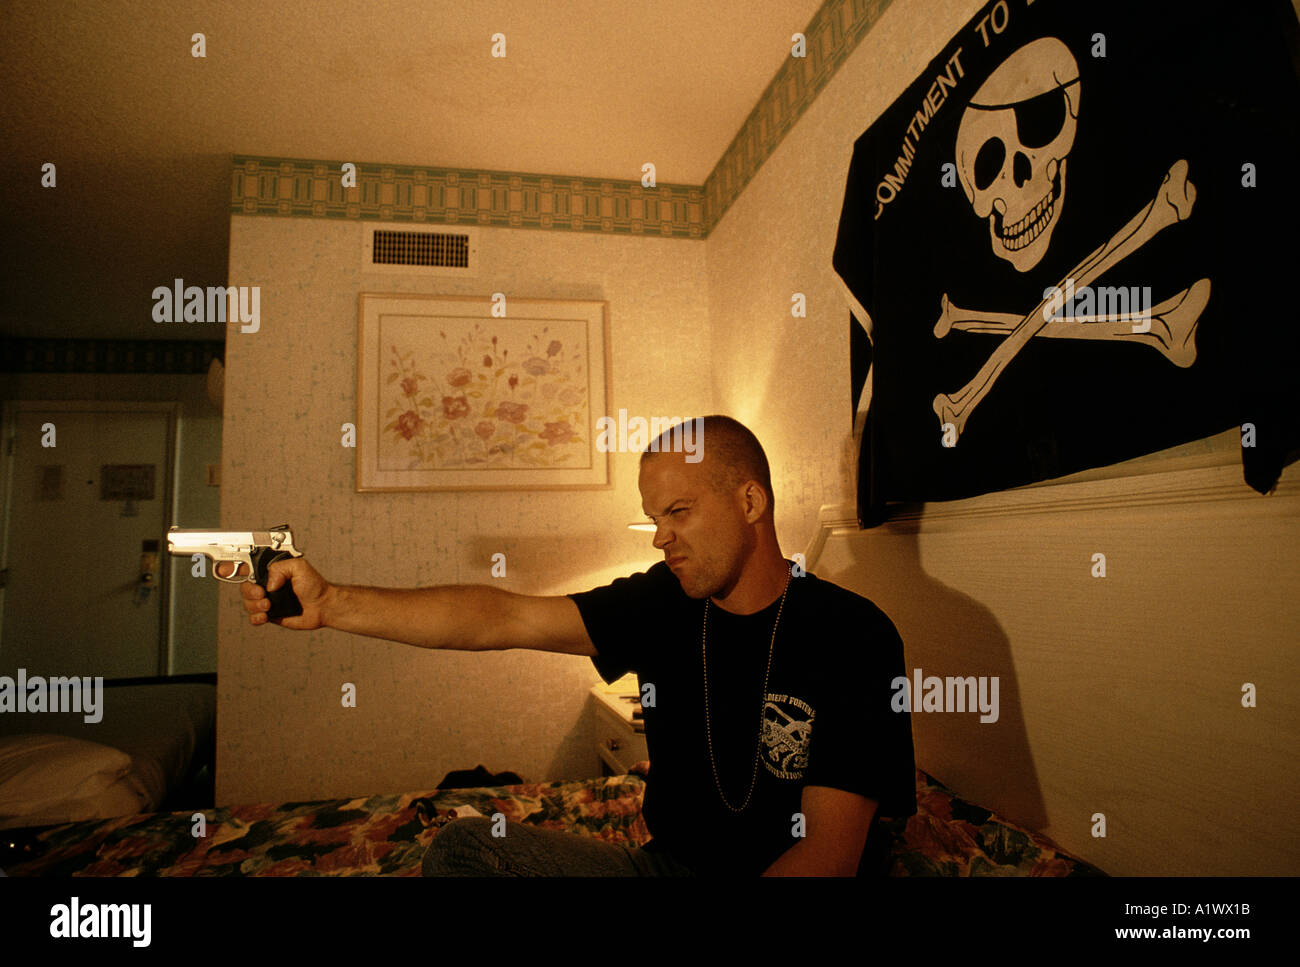 SOLDIERS OF FORTUNE YOUNG MALE CONVENTIONEER IN HIS HOTEL ROOM PLAYING WITH THE GUNS HE OWNS THE FLAG ABOVE THE BED IS OF HIS OWN DESIGN IT READS commitment to exellence the 15th anniversary soldier of fortune magazine annual convention sands hotel las vegas summer 1994 Stock Photo